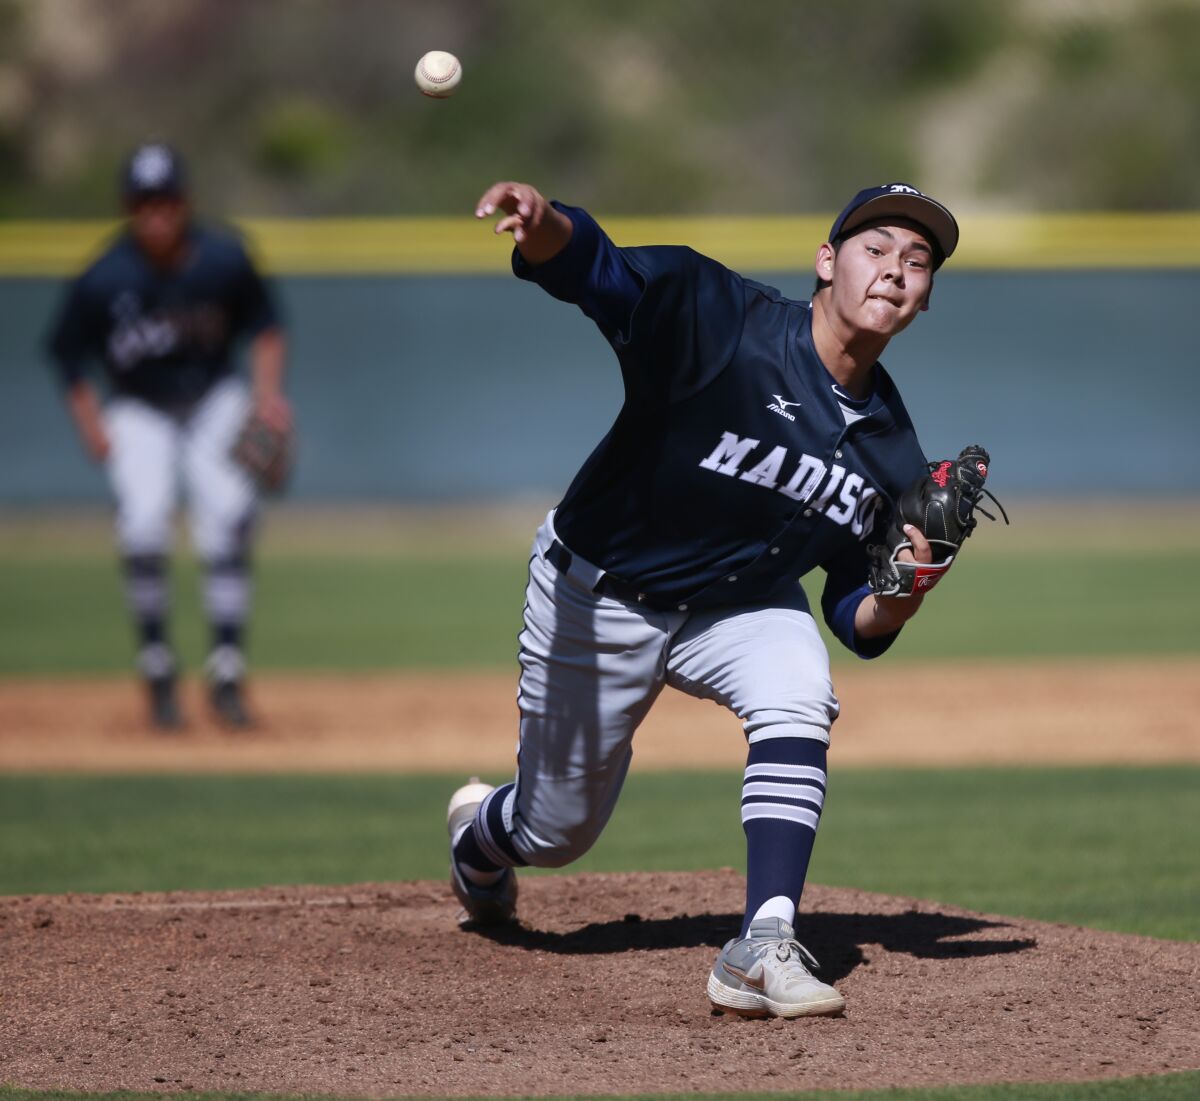 Madison senior Christian Becerra will have pitched his last prep game if the CIF on Friday officially cancels high school spring sports.